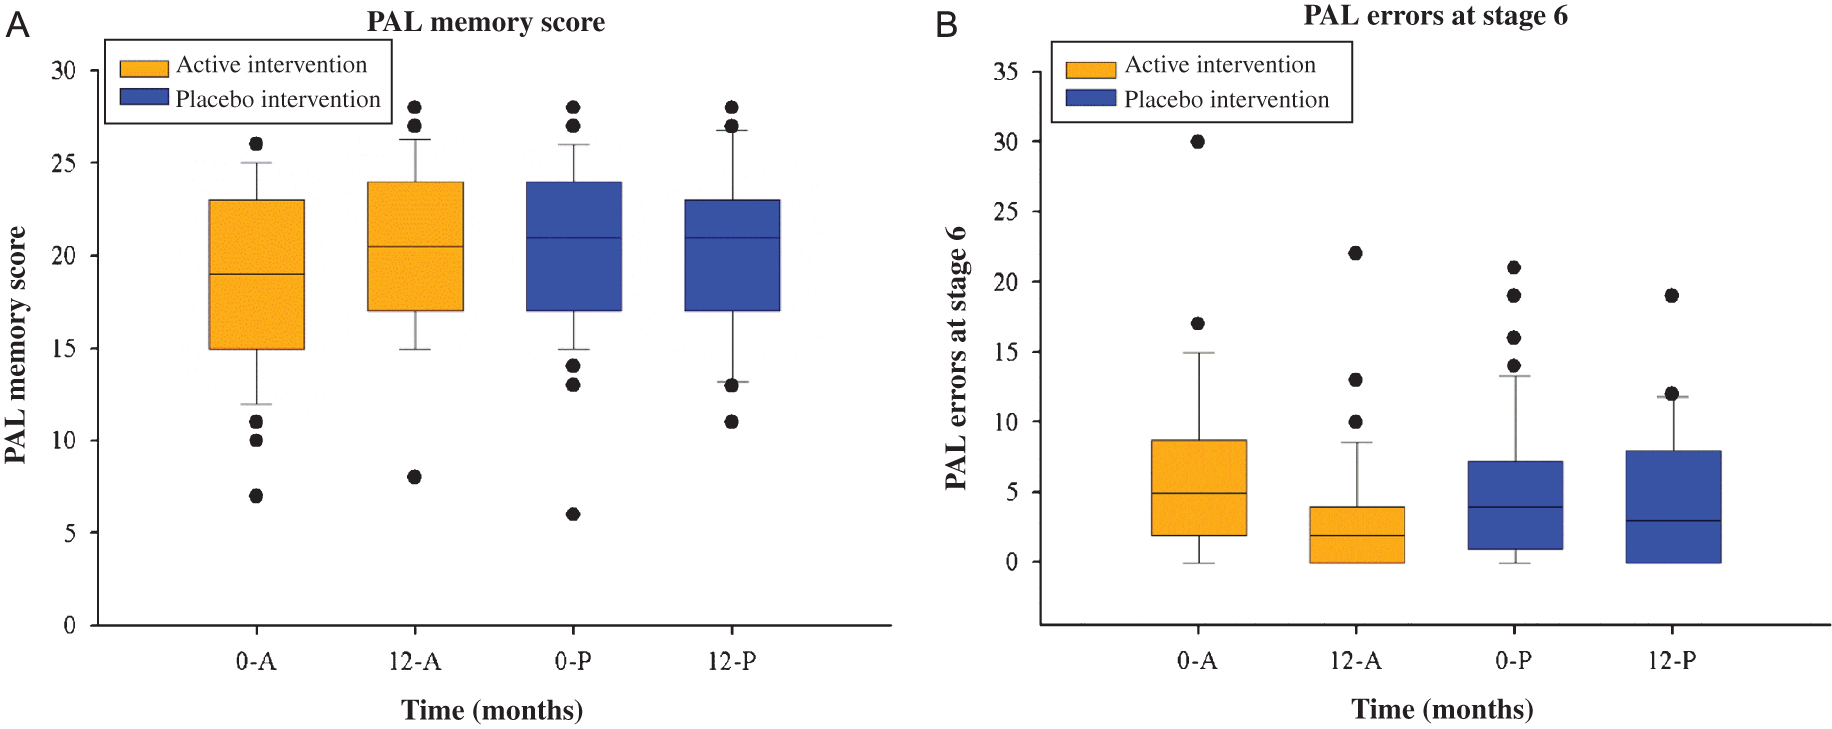 (A) Box plots illustrating overall PAL memory score (A) and total PAL errors (adjusted for stage 6) (B) at baseline and 12-months by intervention group. 0-A, baseline for active intervention; 0, baseline; 12, 12-months; A, active intervention, P, placebo intervention; PAL, paired associated learning.